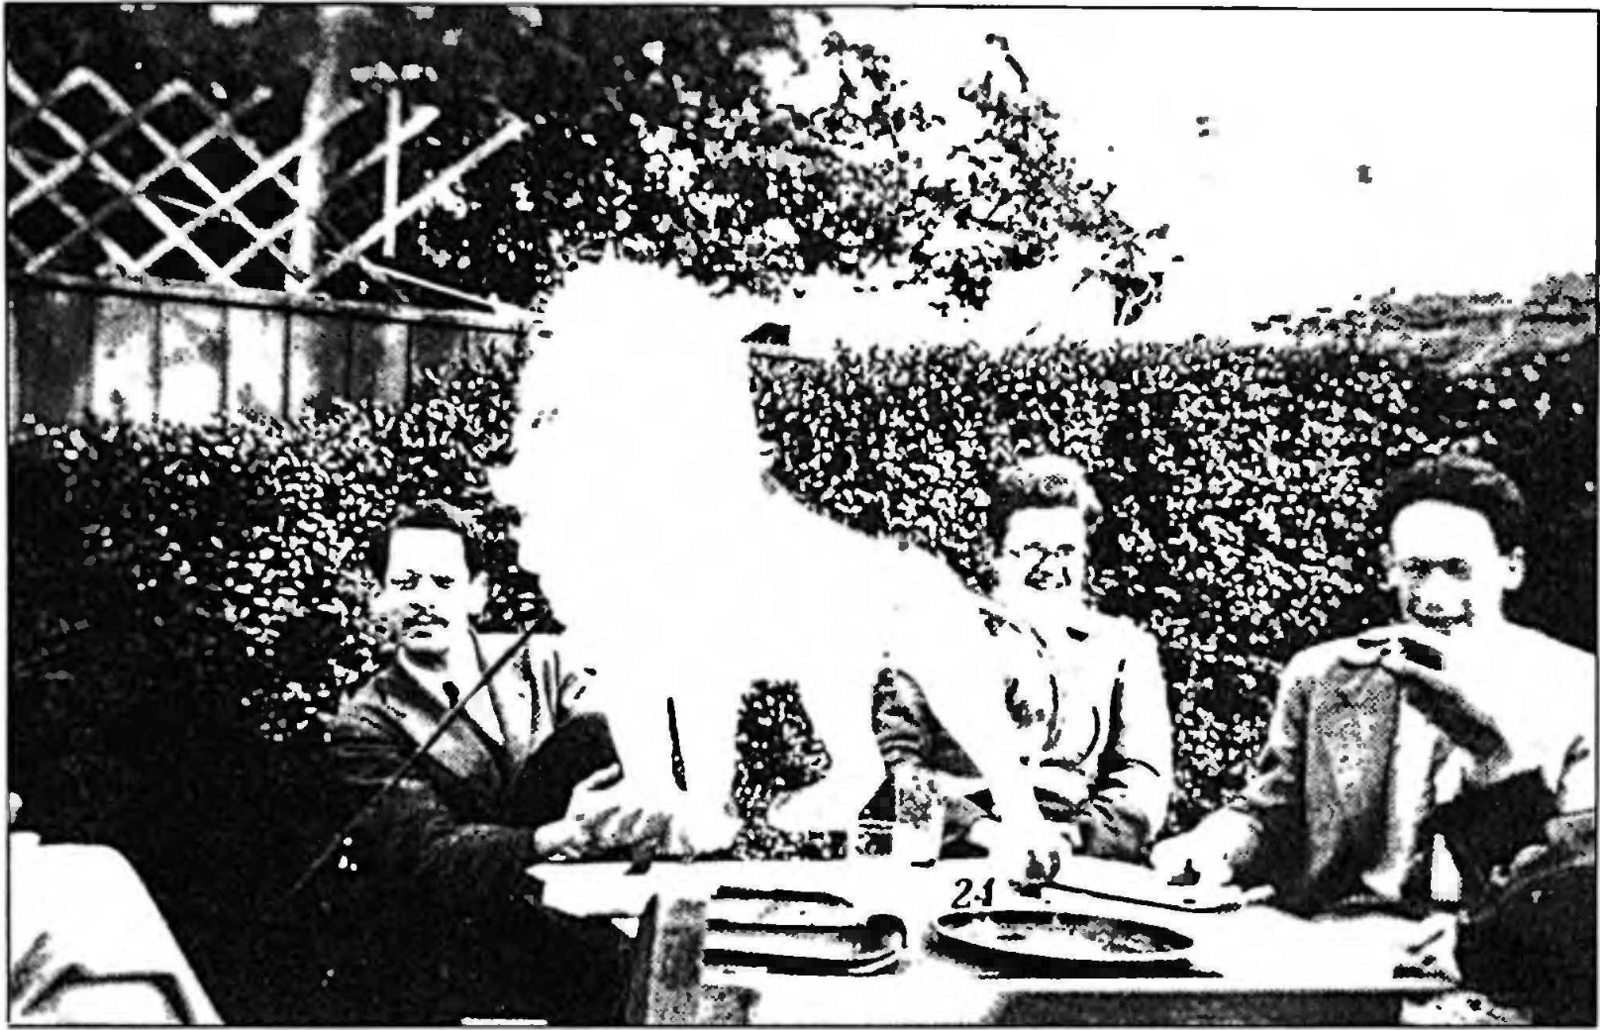 Pétard has captured the lion. From left to right: Boas, Smithies, Weil. Grantchester, 13 May 1939.